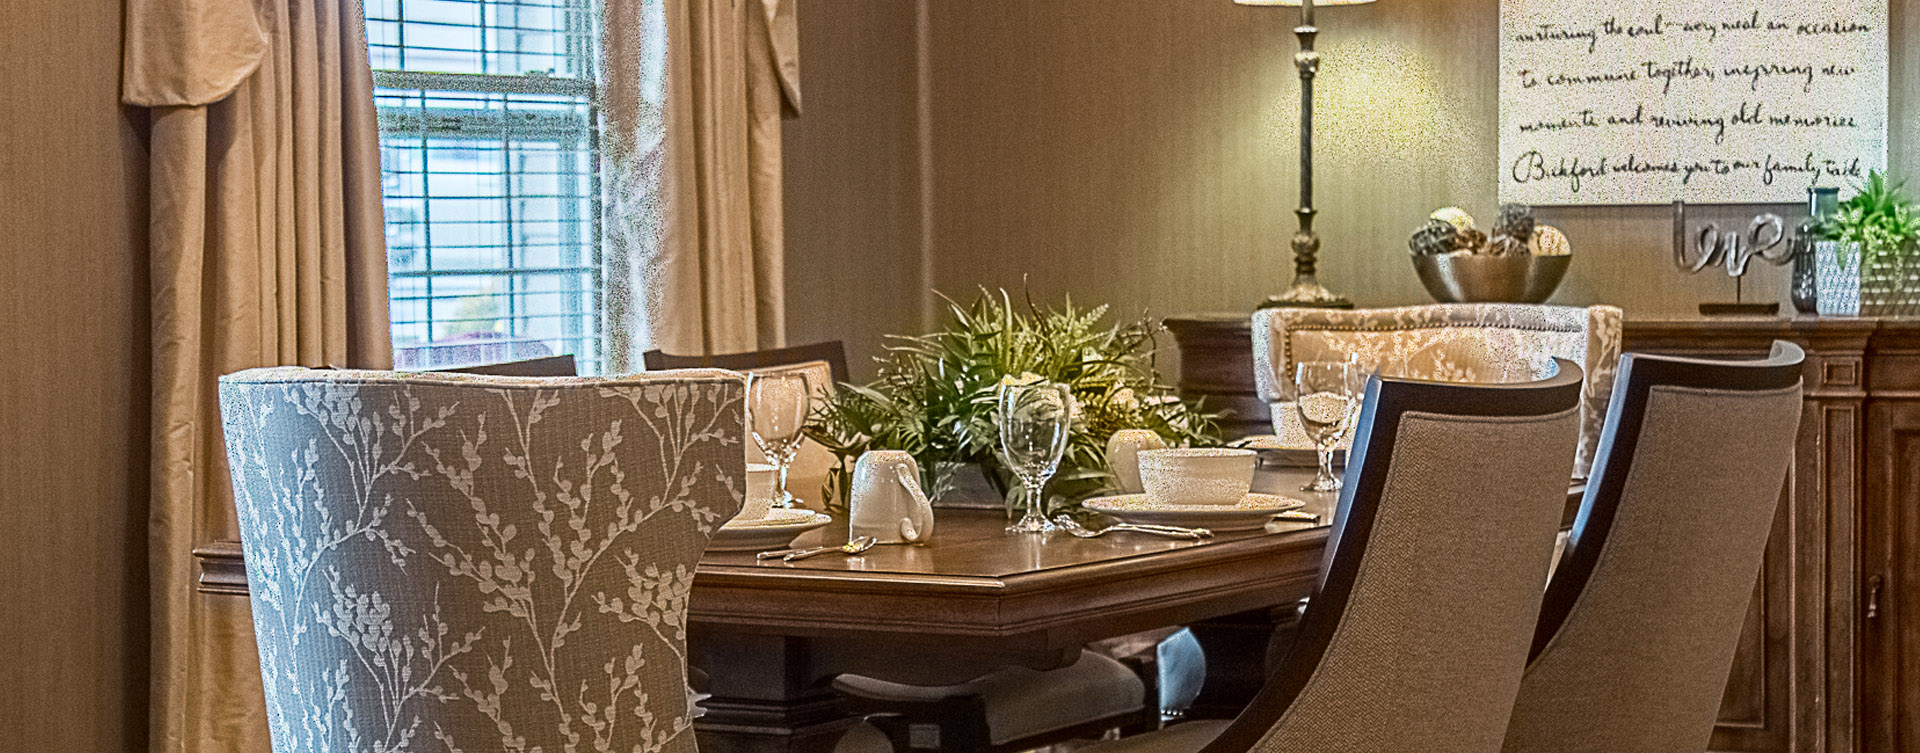 Food is best when shared with family and friends in the private dining room at Bickford of Davenport